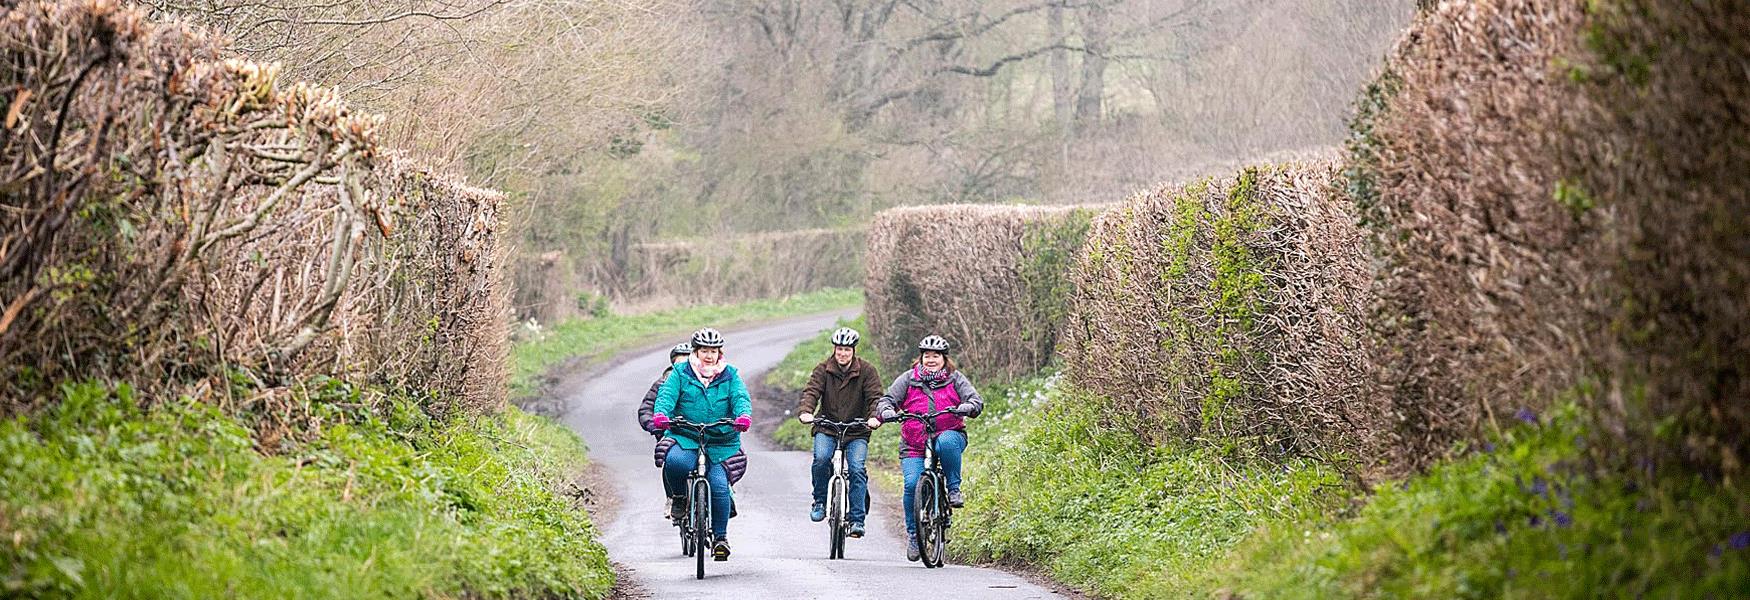 Enjoy the electric bikes on quiet lanes, stop for hot chocolate and sausages and mash for lunch at a local publ